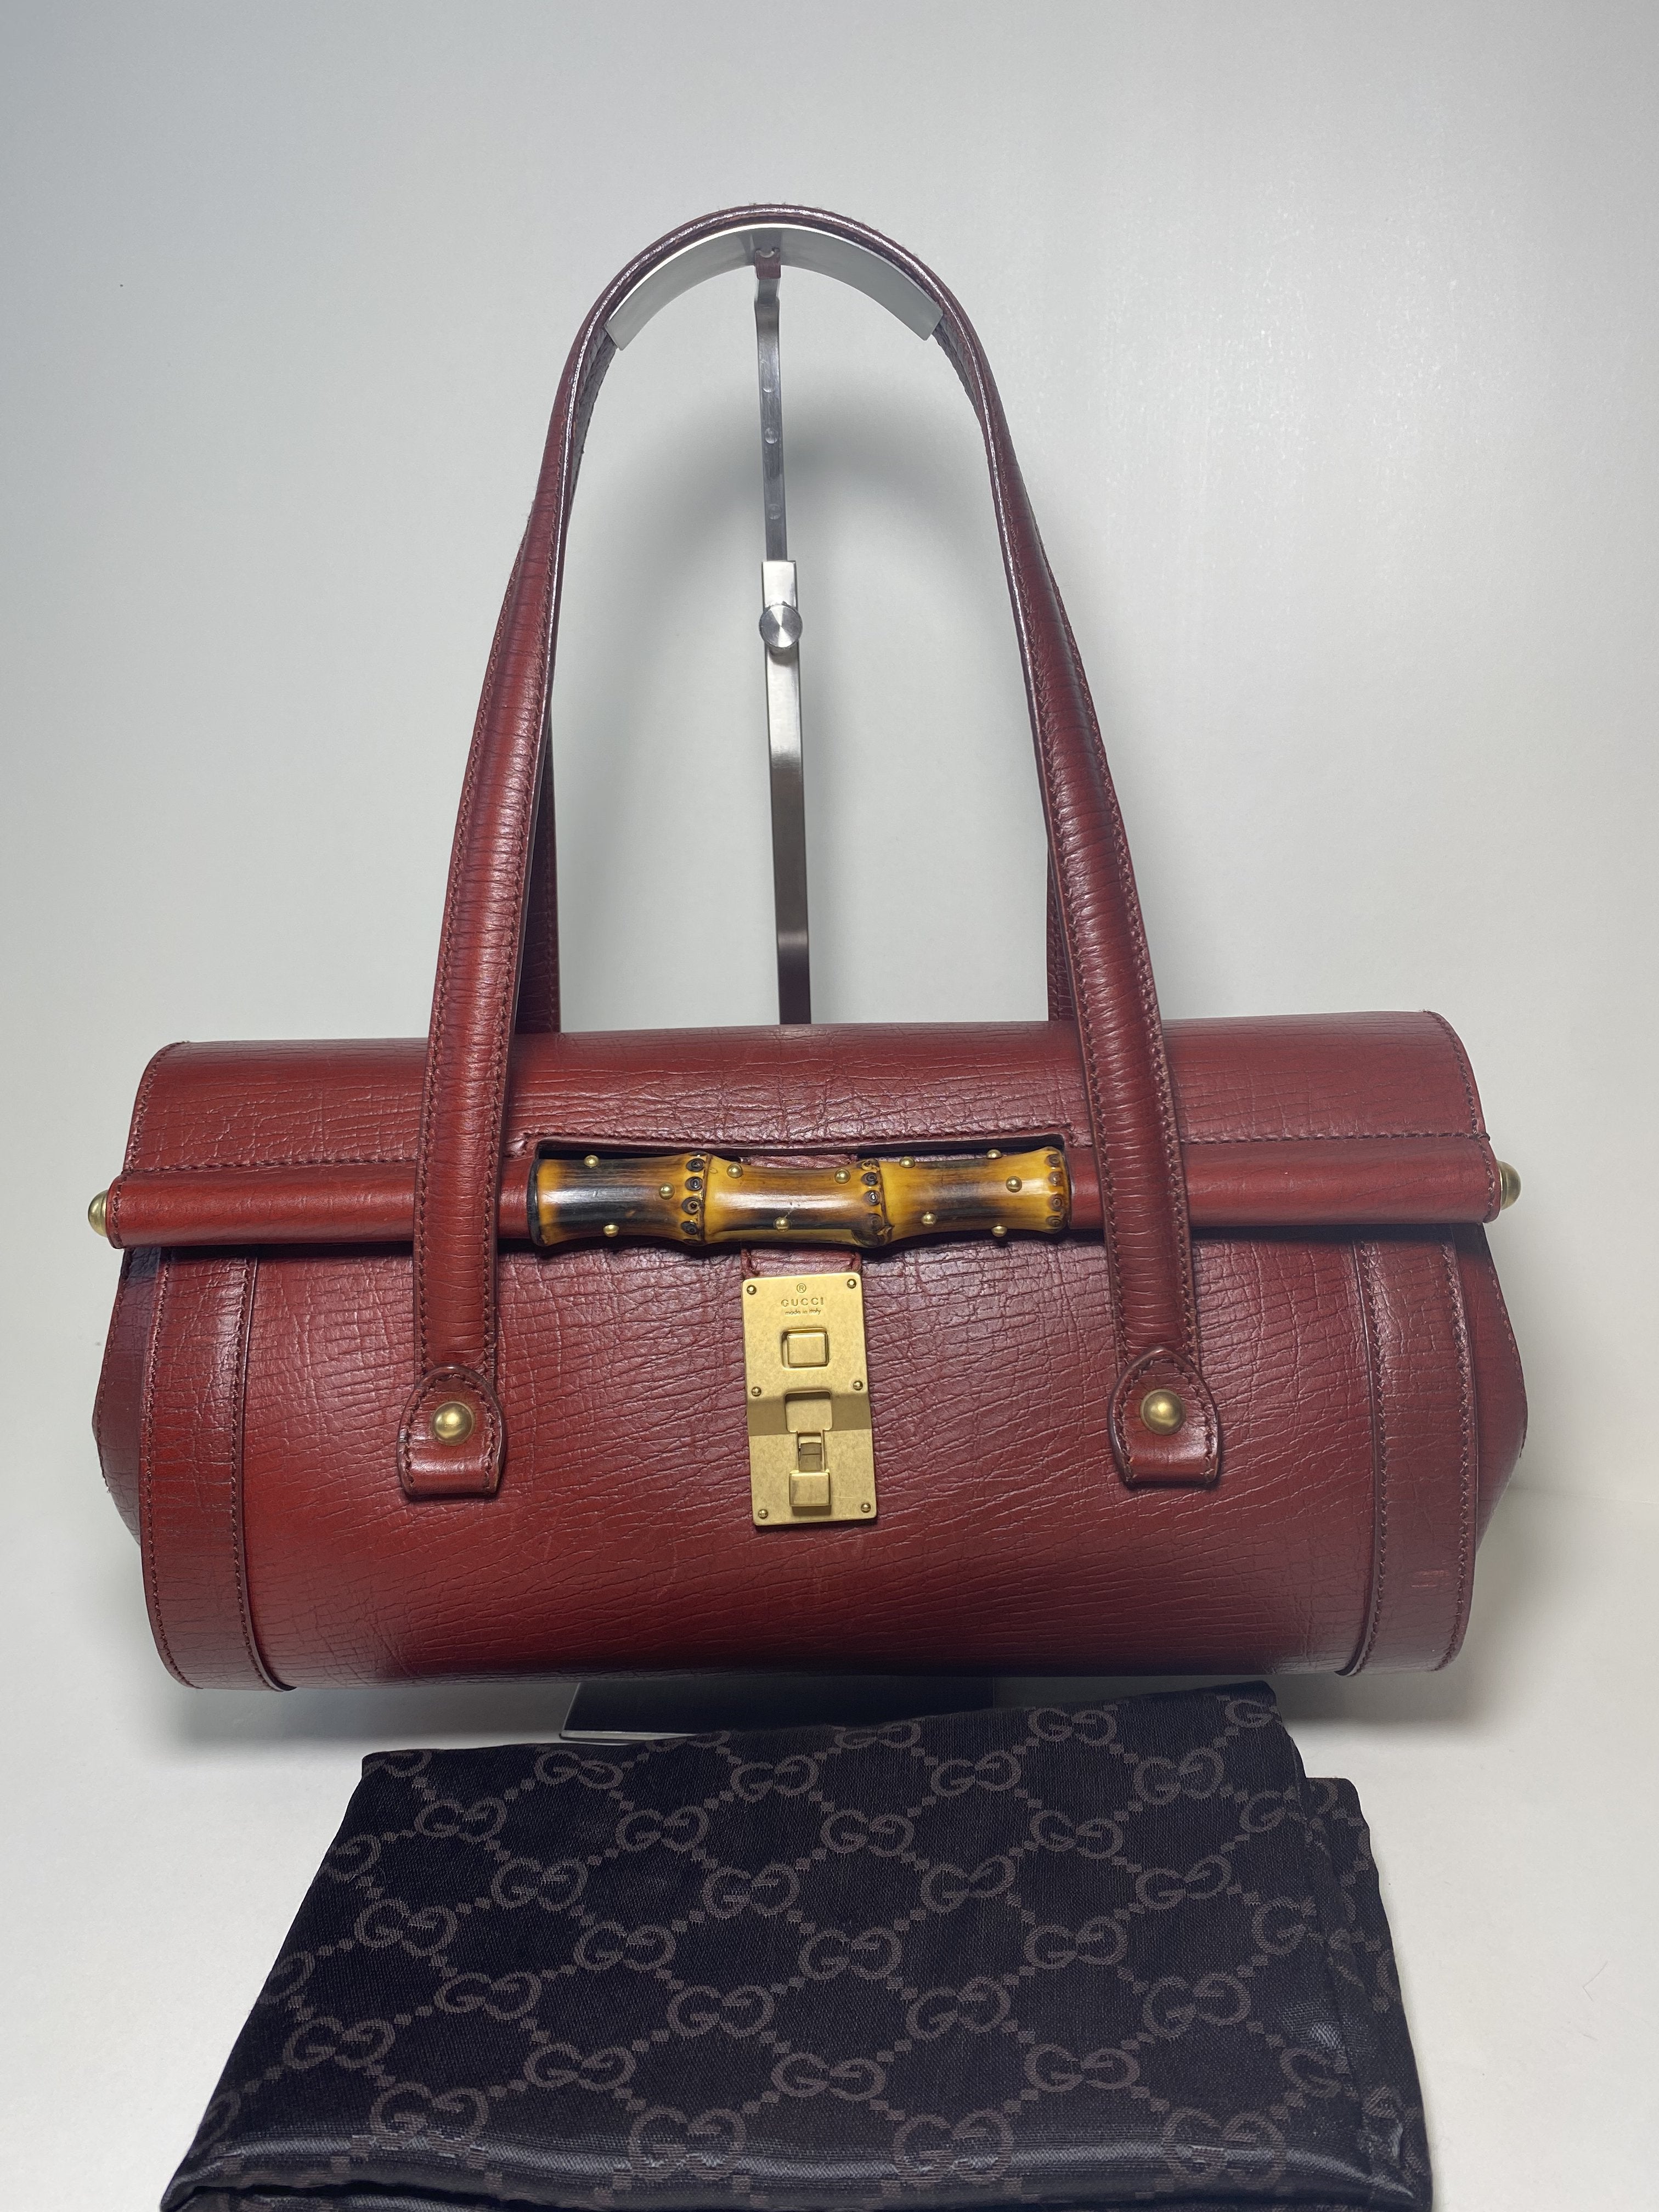 Gucci by Tom Ford Bamboo Top Handle